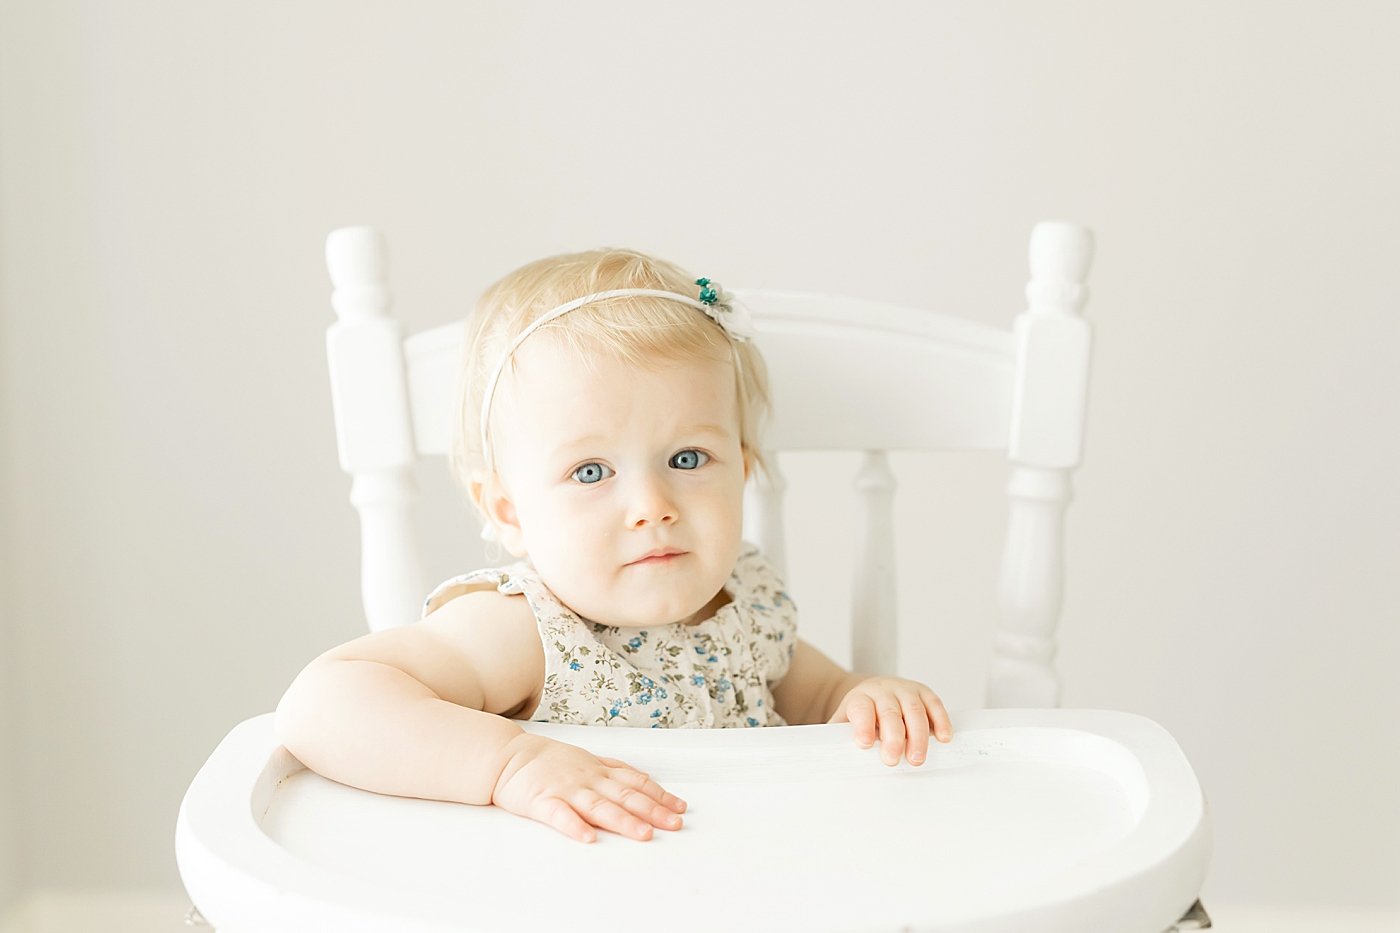 Baby girl with blue eyes sitting in high chair for one year session with Fresh Light Photography.